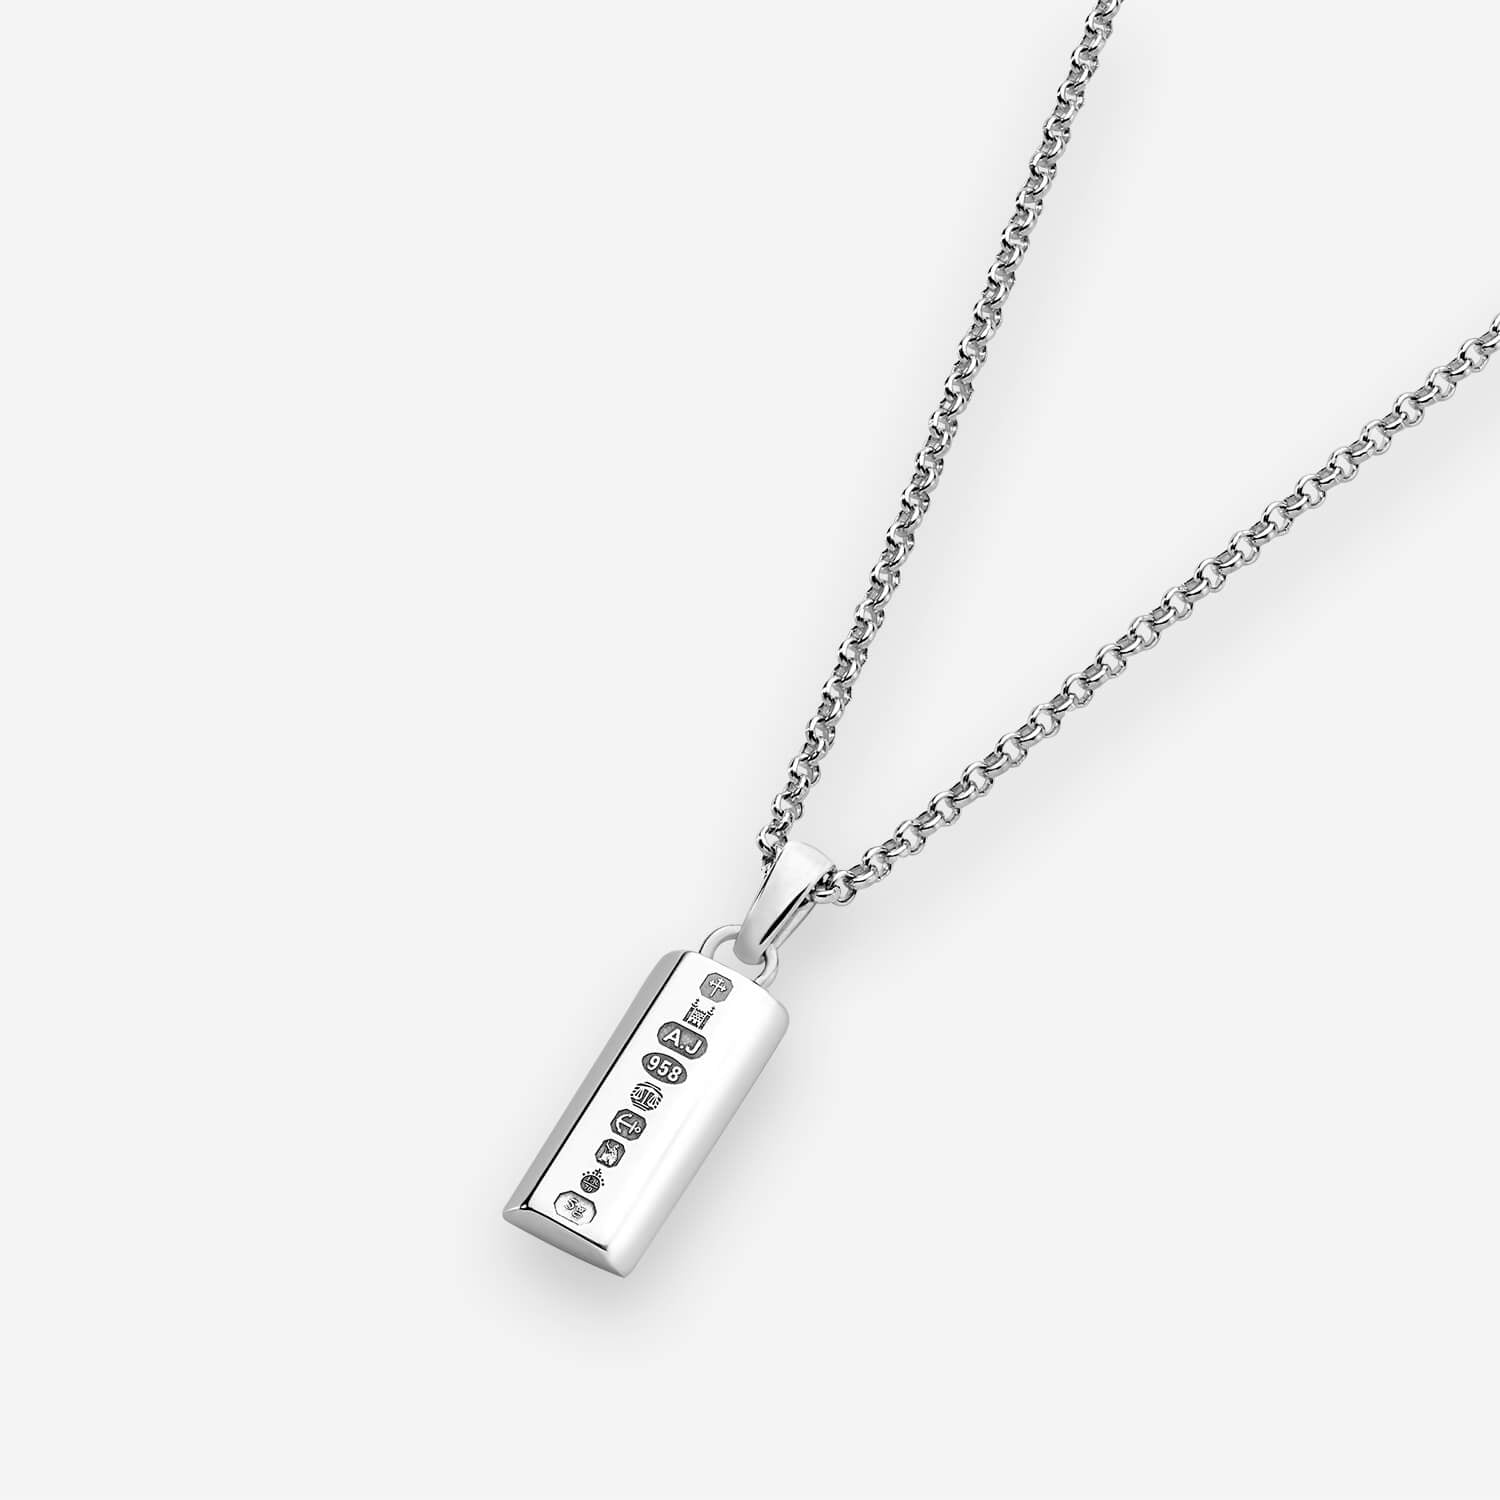 886 Royal Mint 886 Bar Pendant Sterling Silver - Choose Your Chain Length